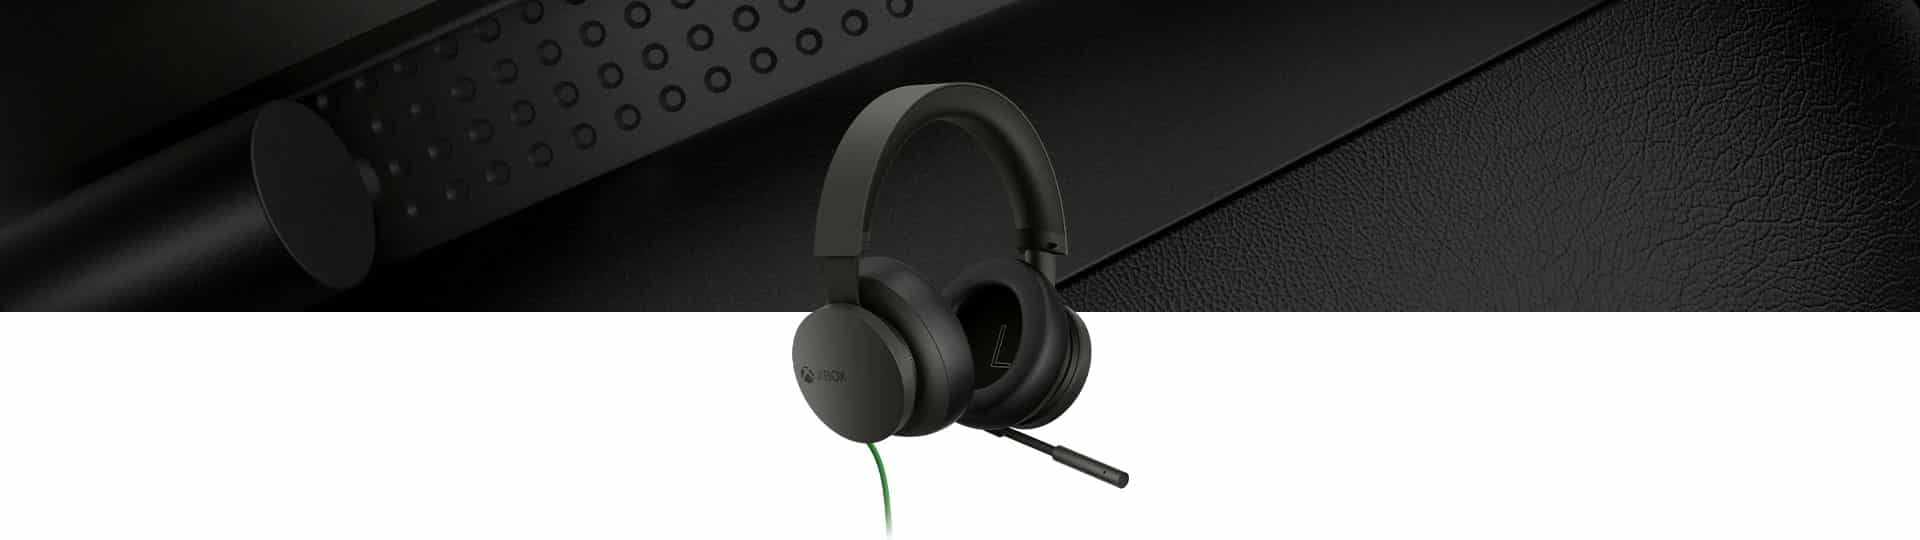 Microsoft Xbox Series Wired Gaming Headset - Black Cover